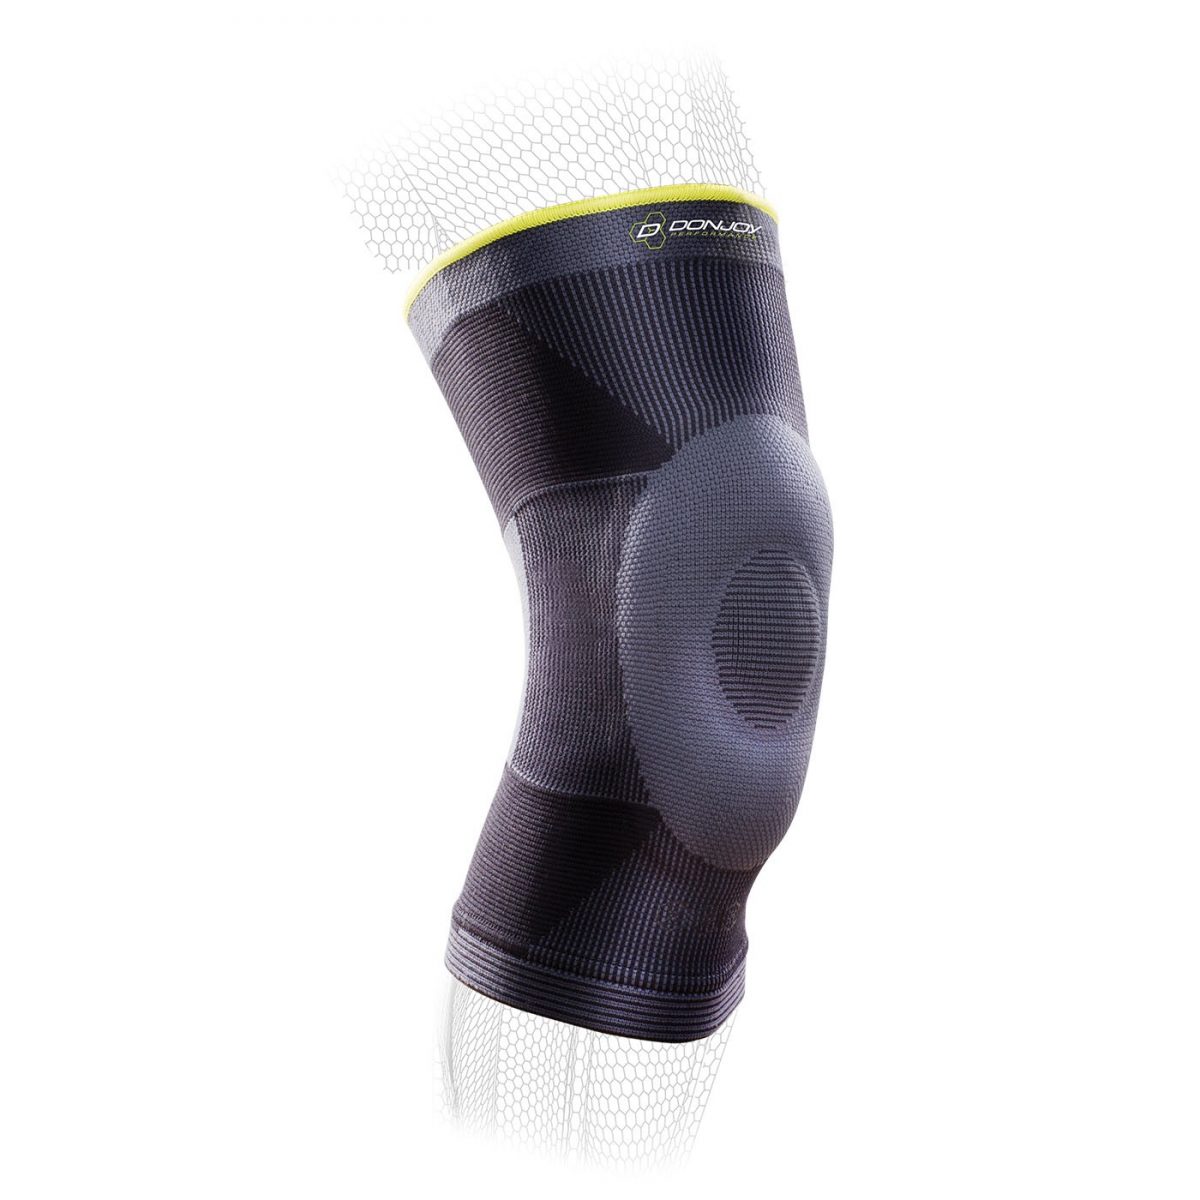 DonJoy Performance Deluxe Knit Knee Sleeve